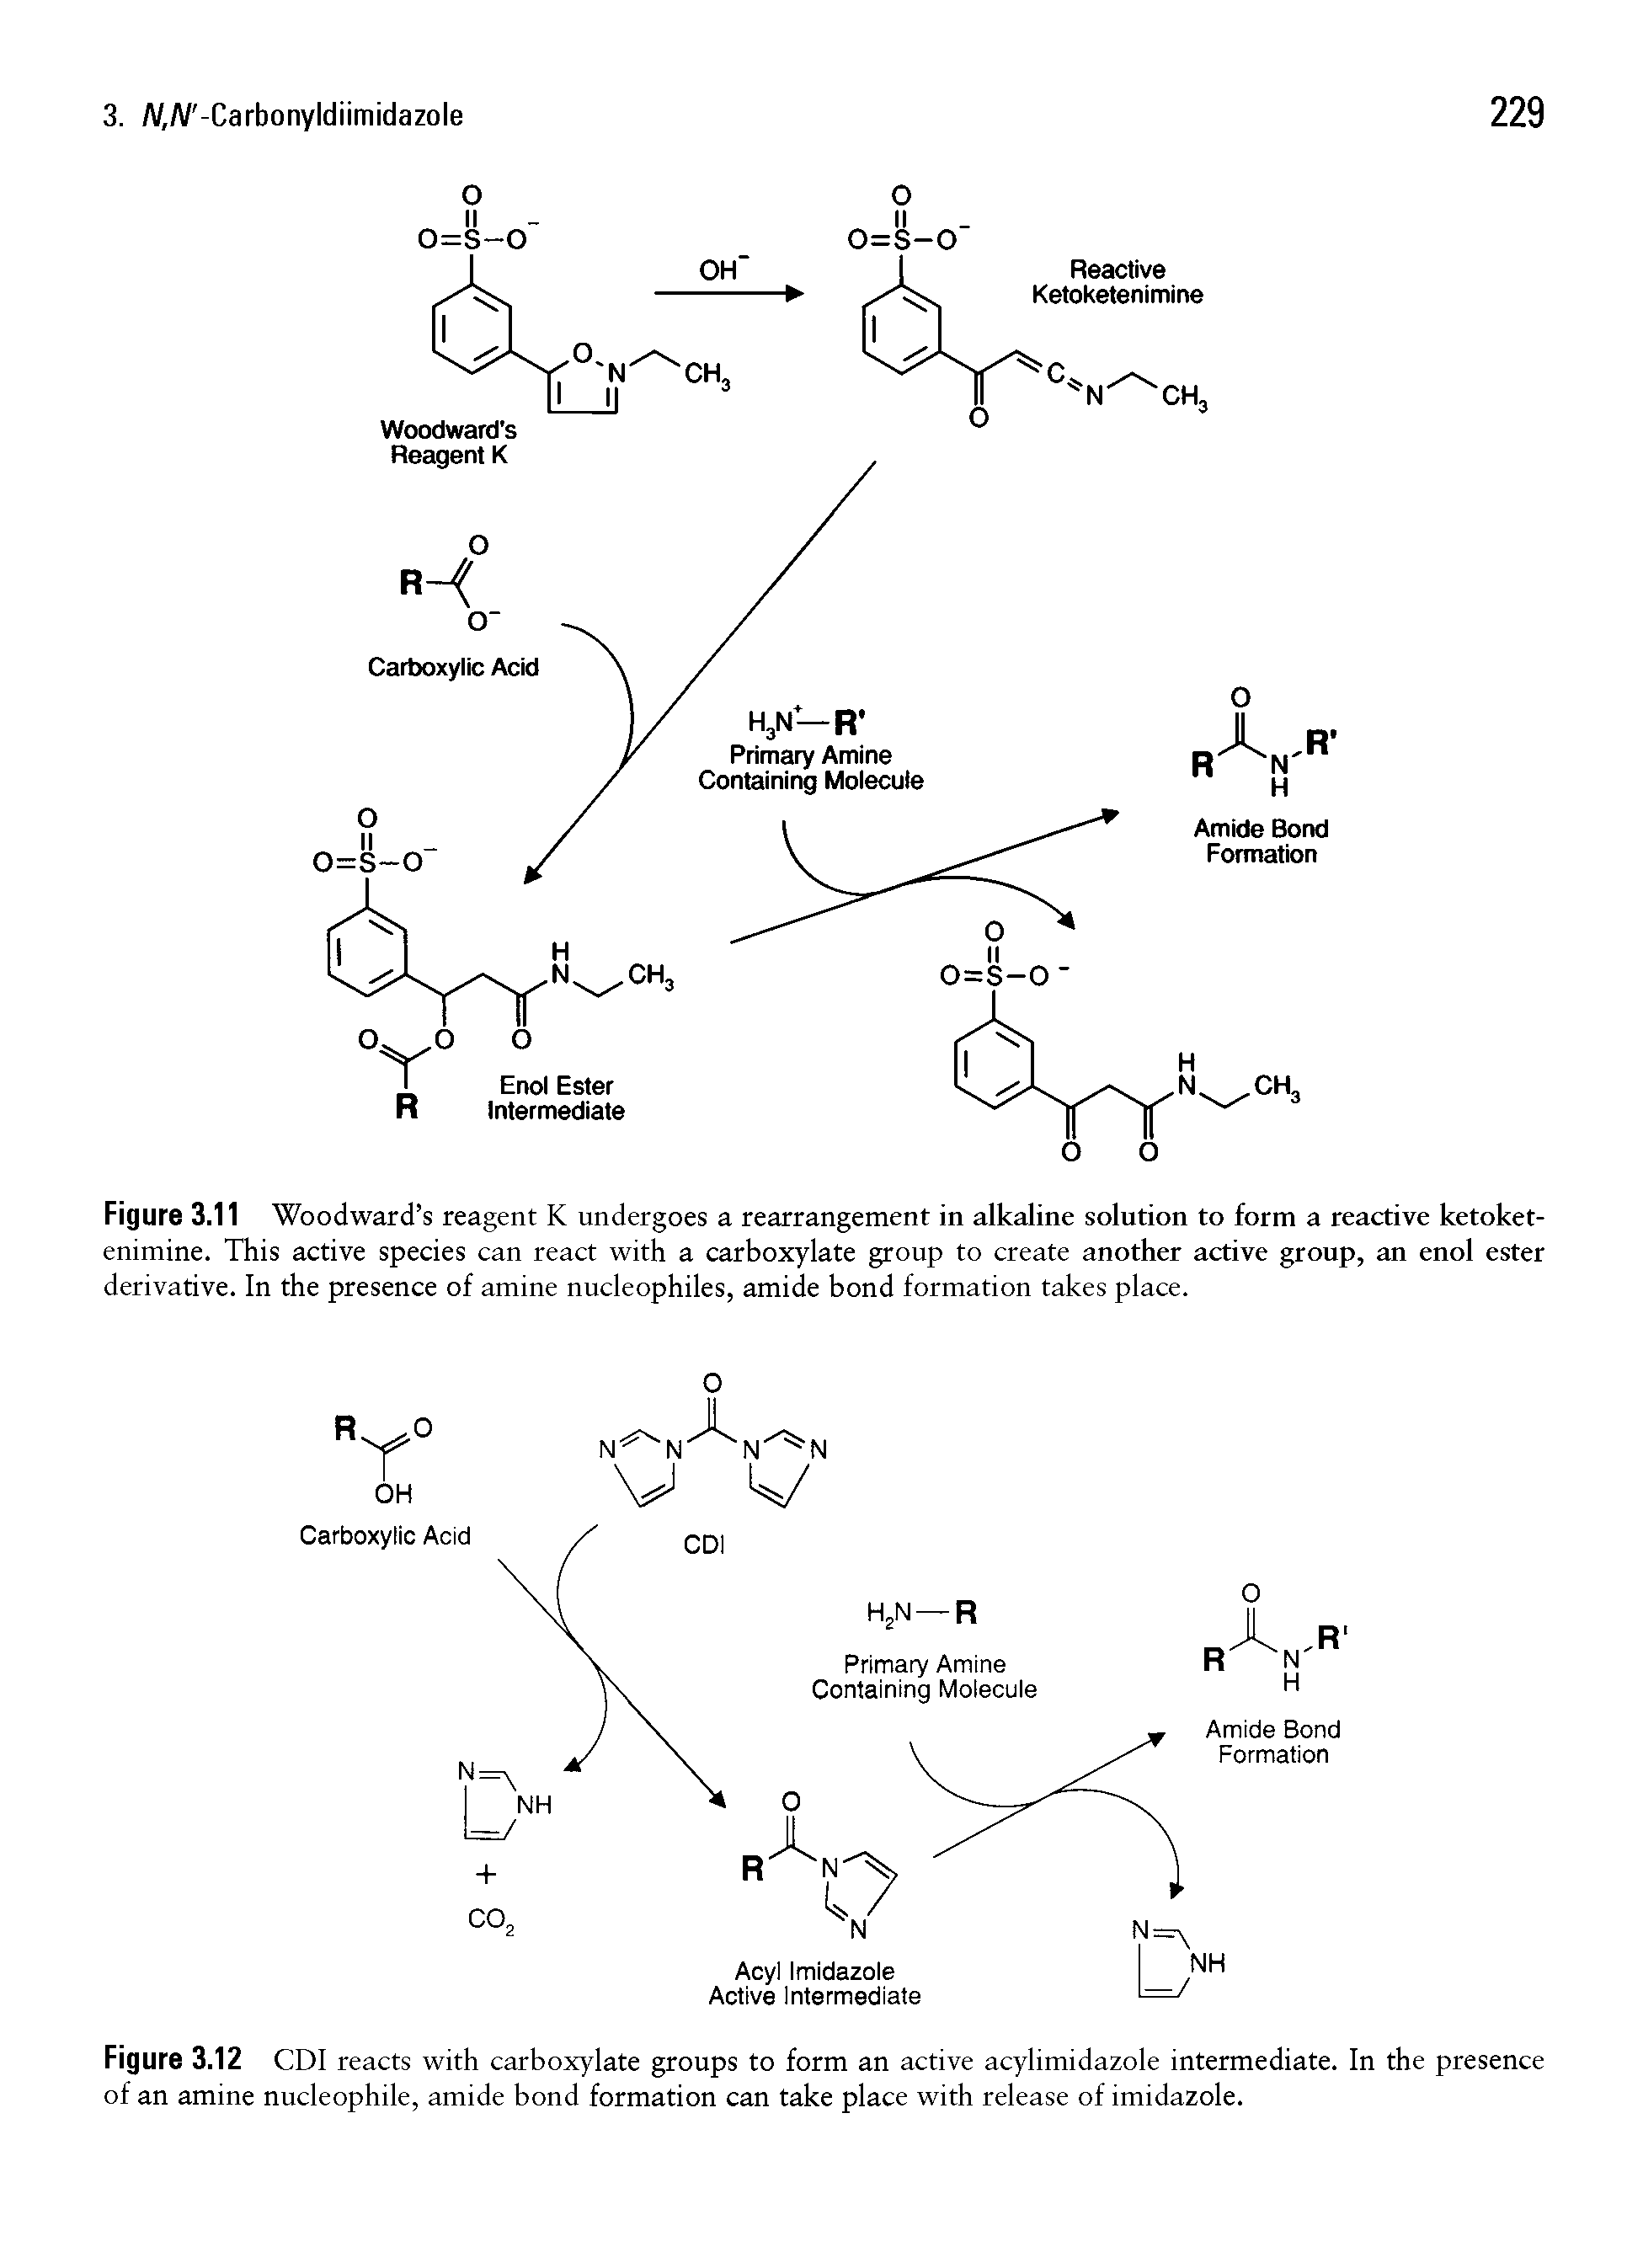 Figure 3.12 CDI reacts with carboxylate groups to form an active acylimidazole intermediate. In the presence of an amine nucleophile, amide bond formation can take place with release of imidazole.